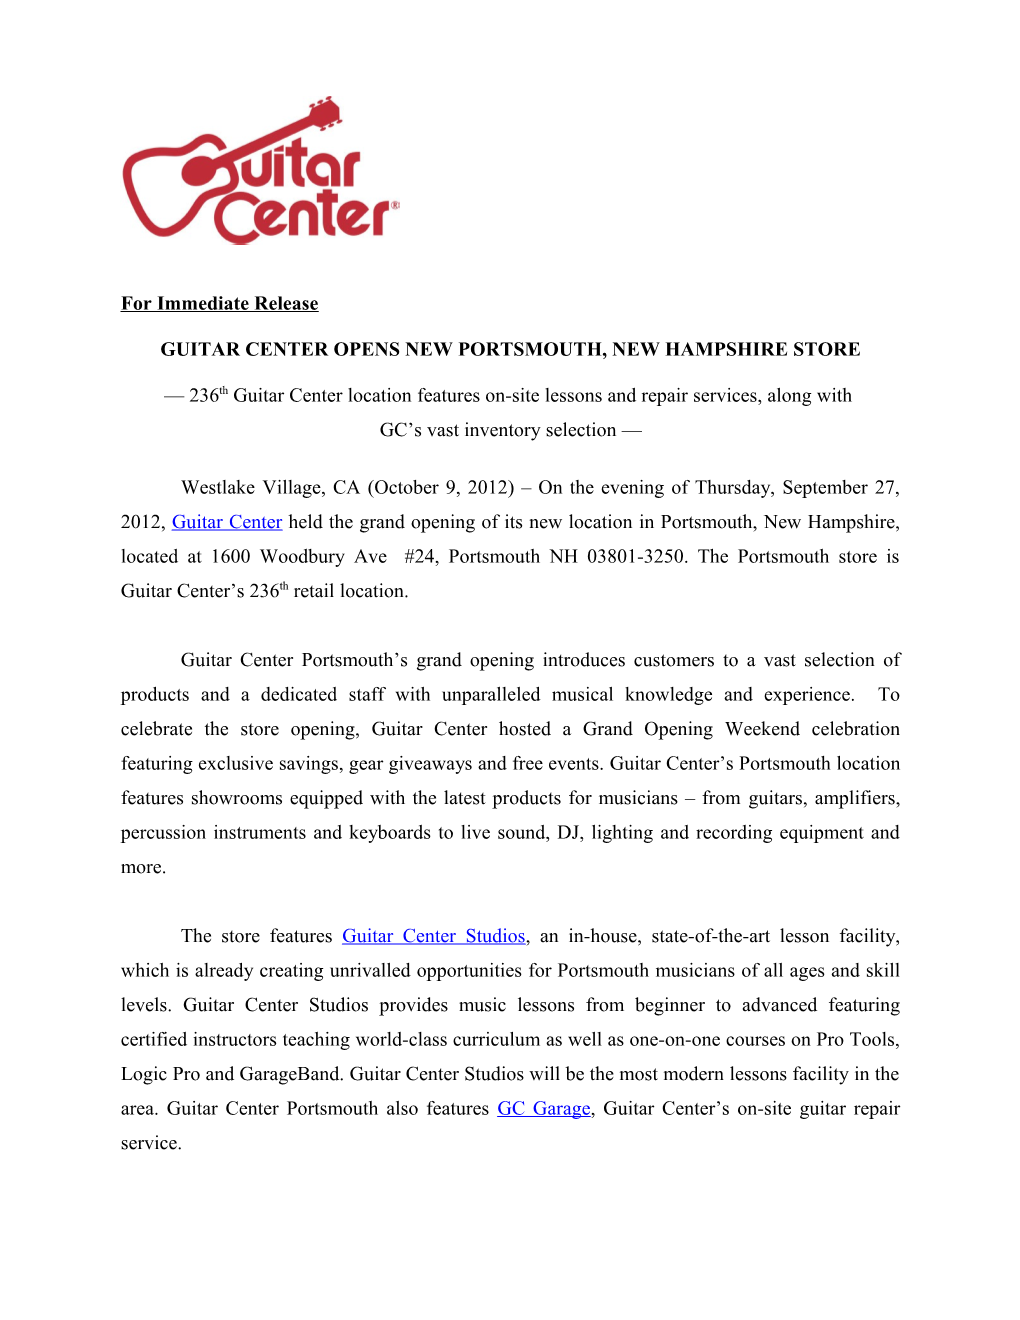 Guitar Center Opens New Portsmouth, New Hampshire Store